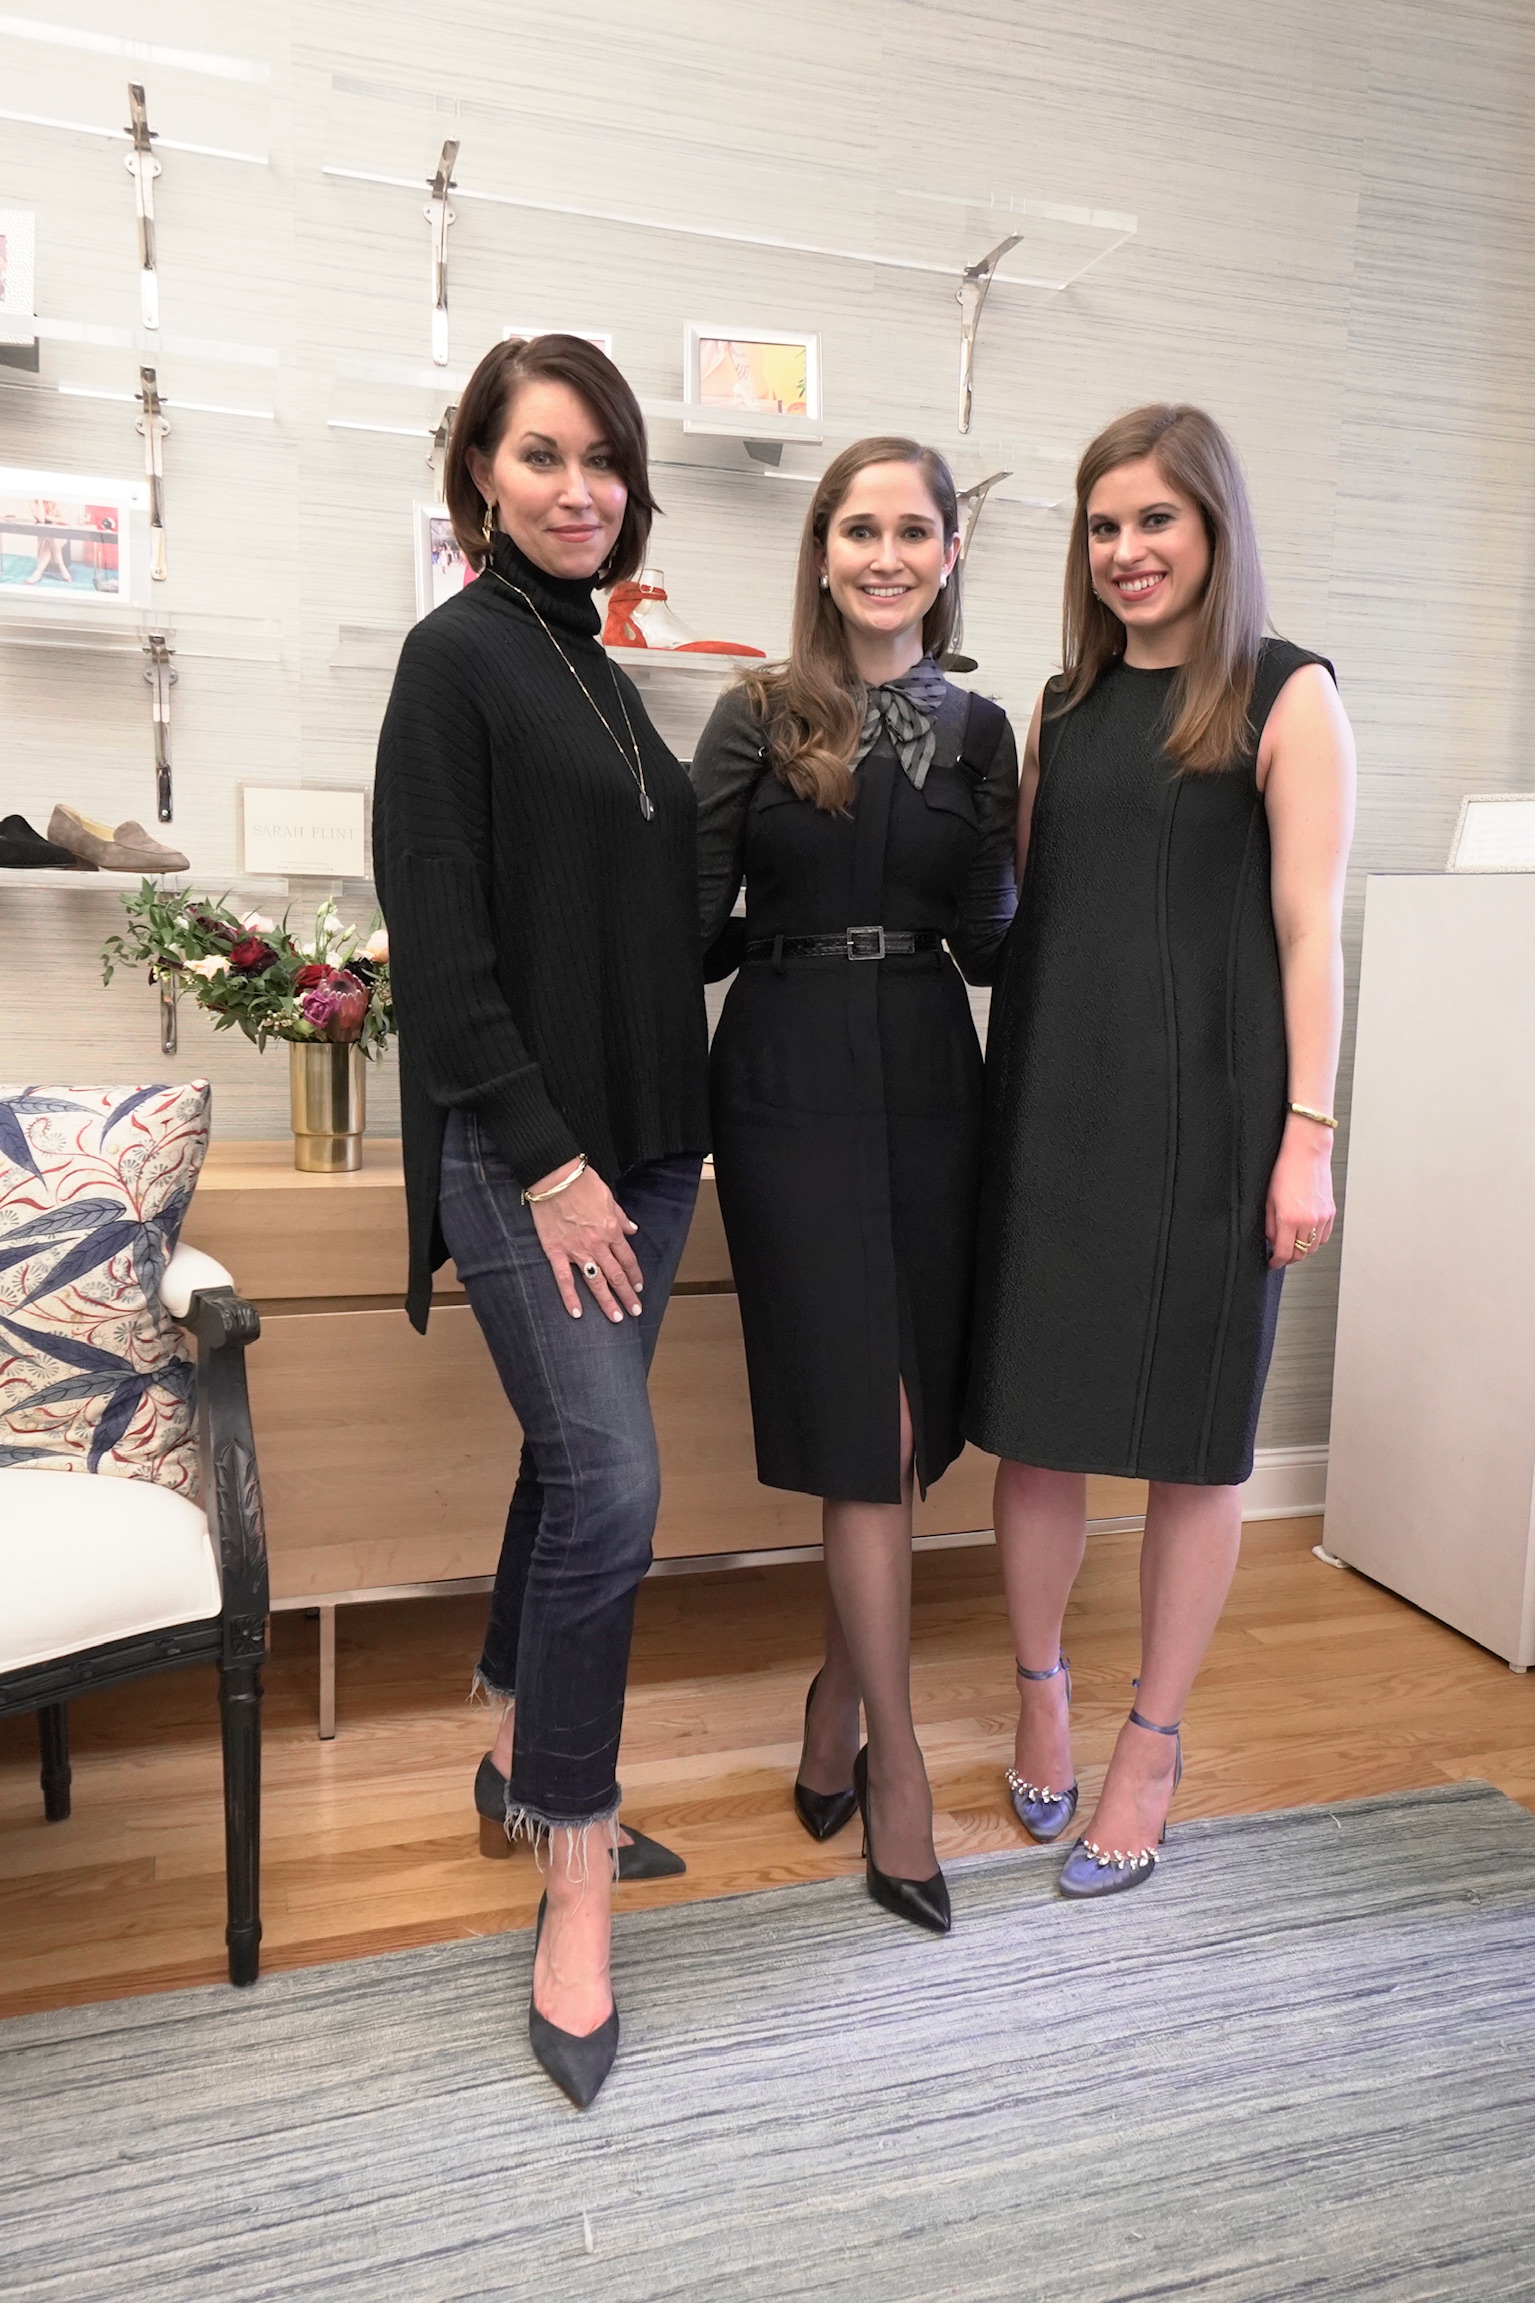 Three women standing in a showroom: one wearing a black top, jeans and heels, and the other two are wearing black dresses and heels, they all have brown hair